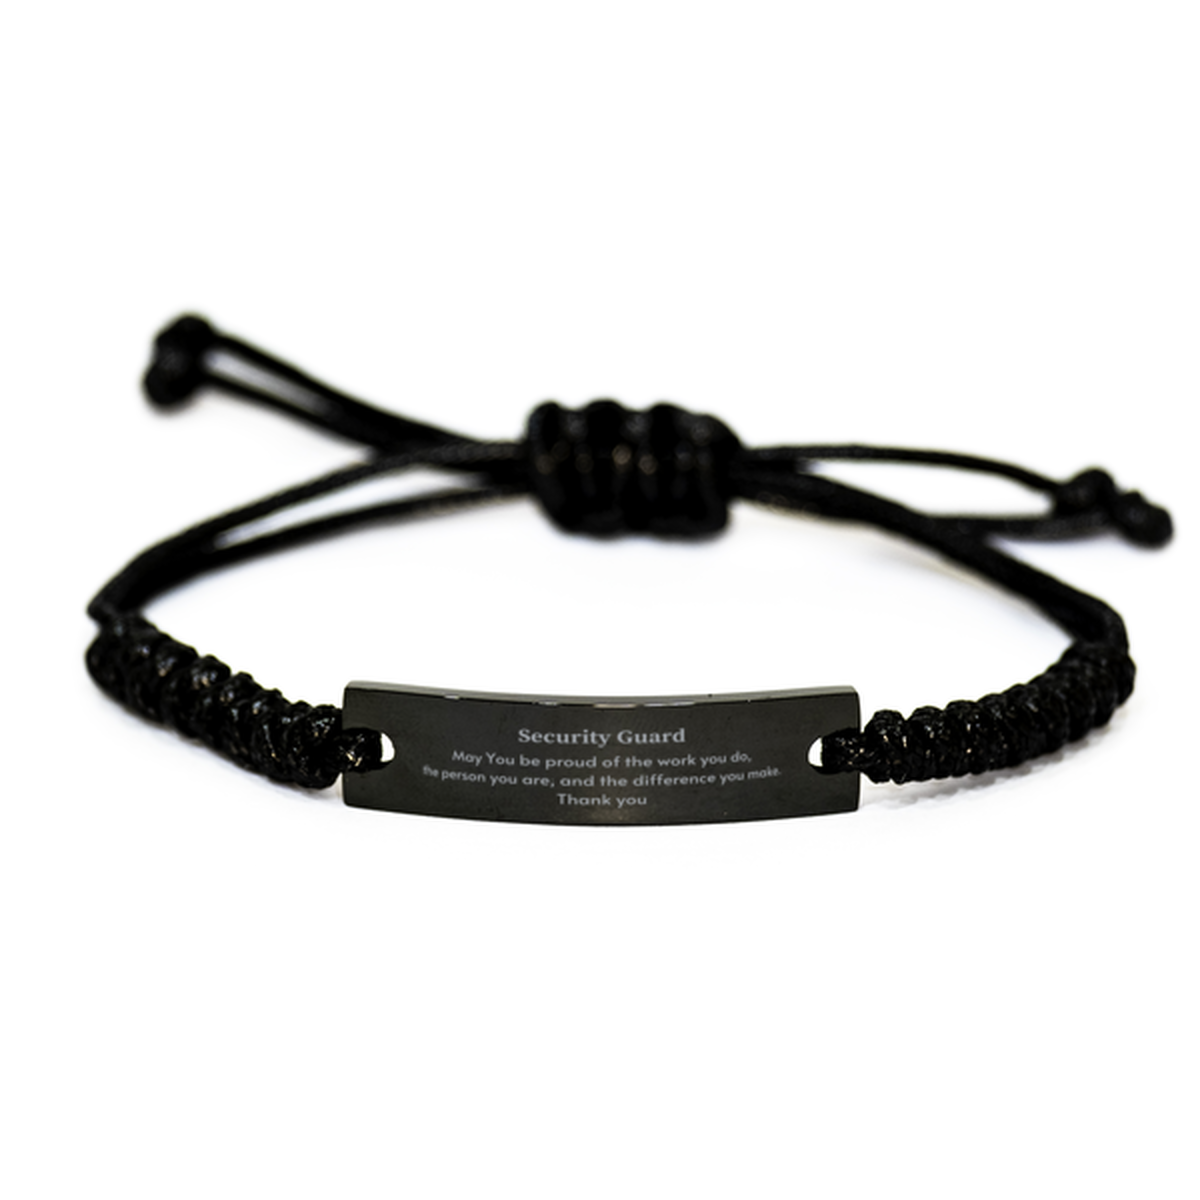 Heartwarming Black Rope Bracelet Retirement Coworkers Gifts for Security Guard, Security Guard May You be proud of the work you do, the person you are Gifts for Boss Men Women Friends